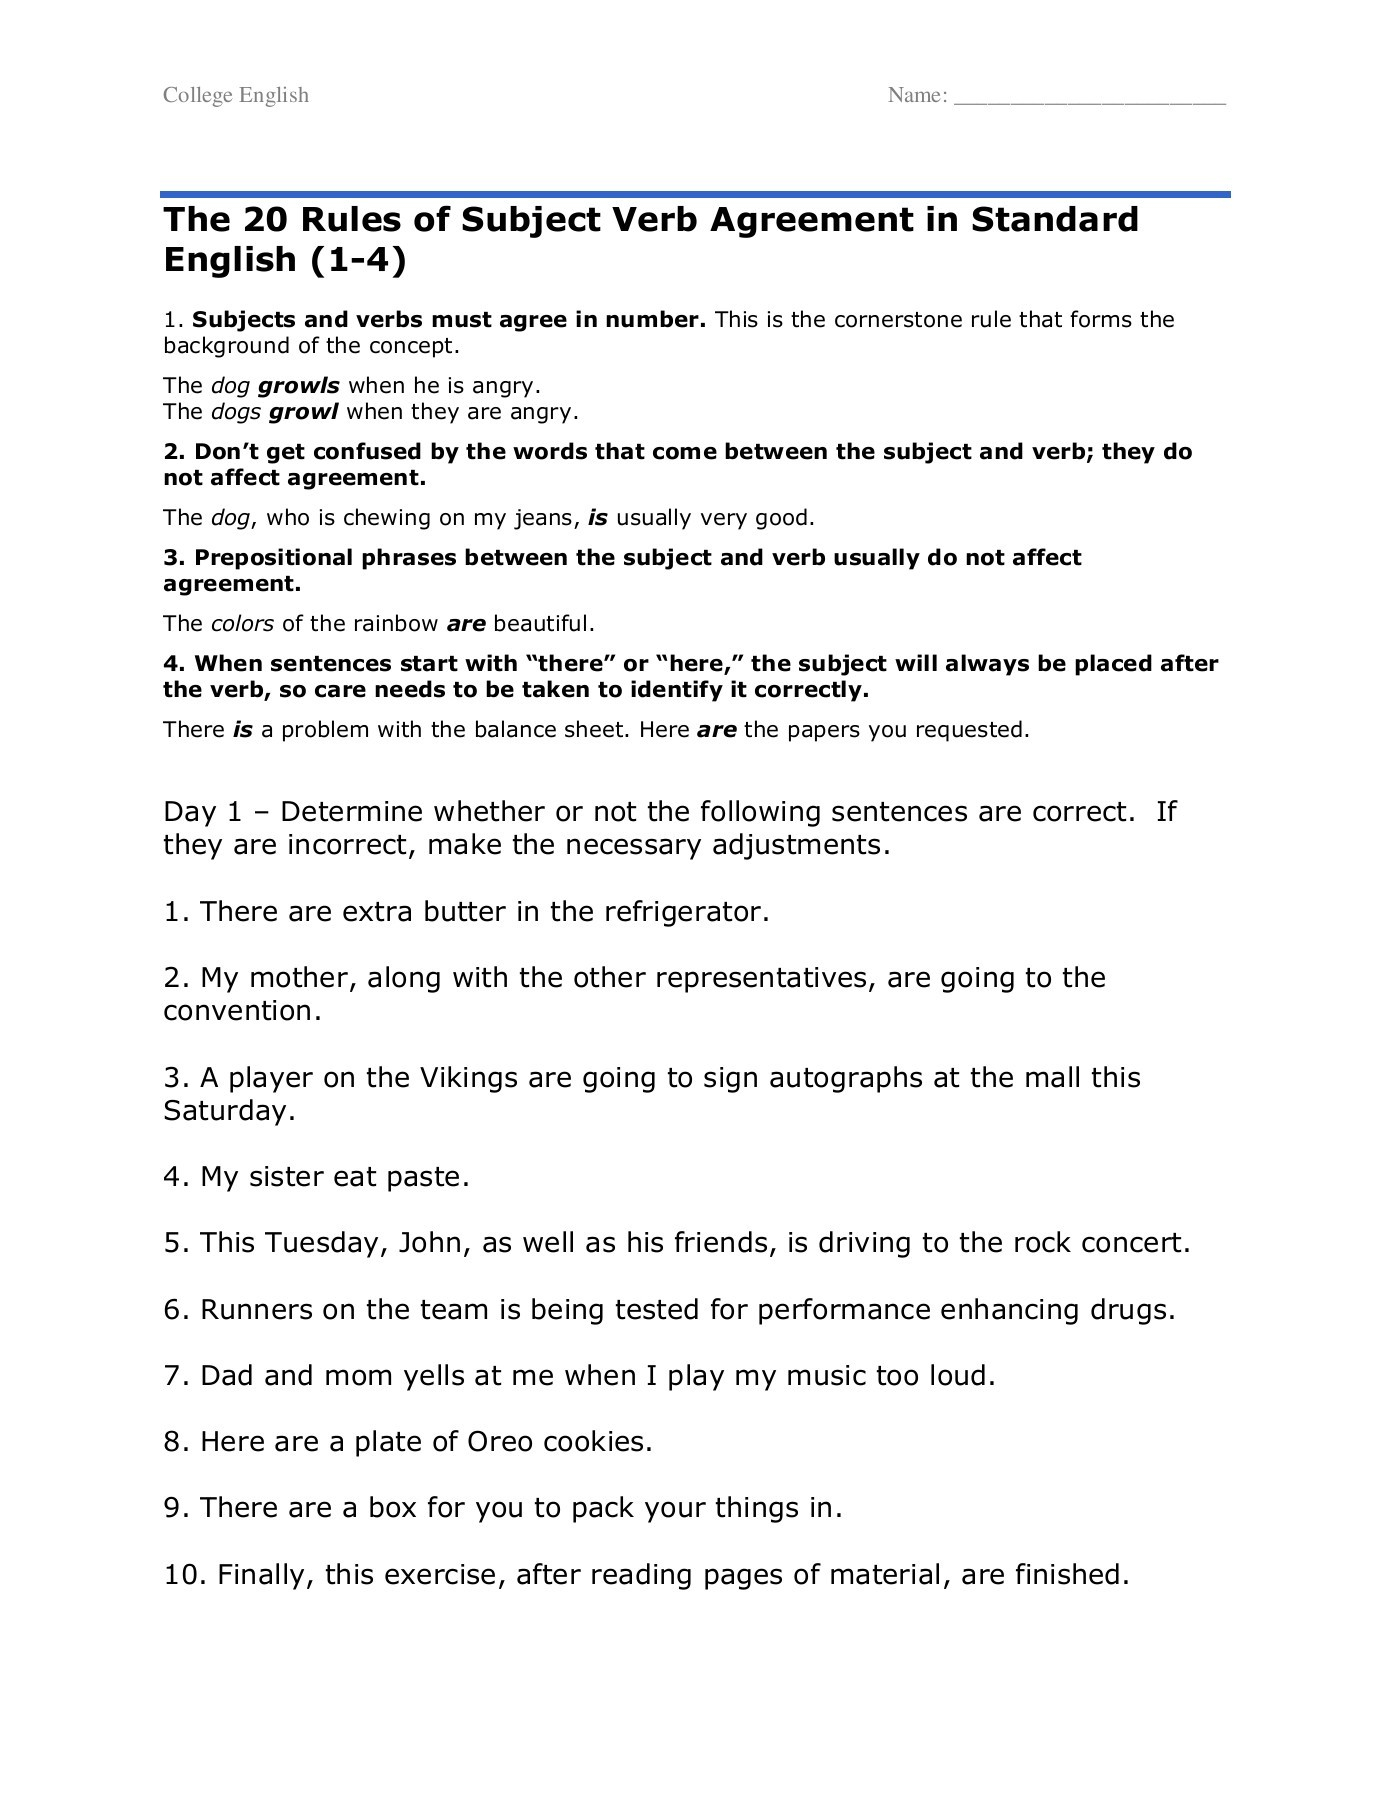 Subject Of Verb Agreement The 20 Rules Of Subject Verb Agreement In Standard English Pages